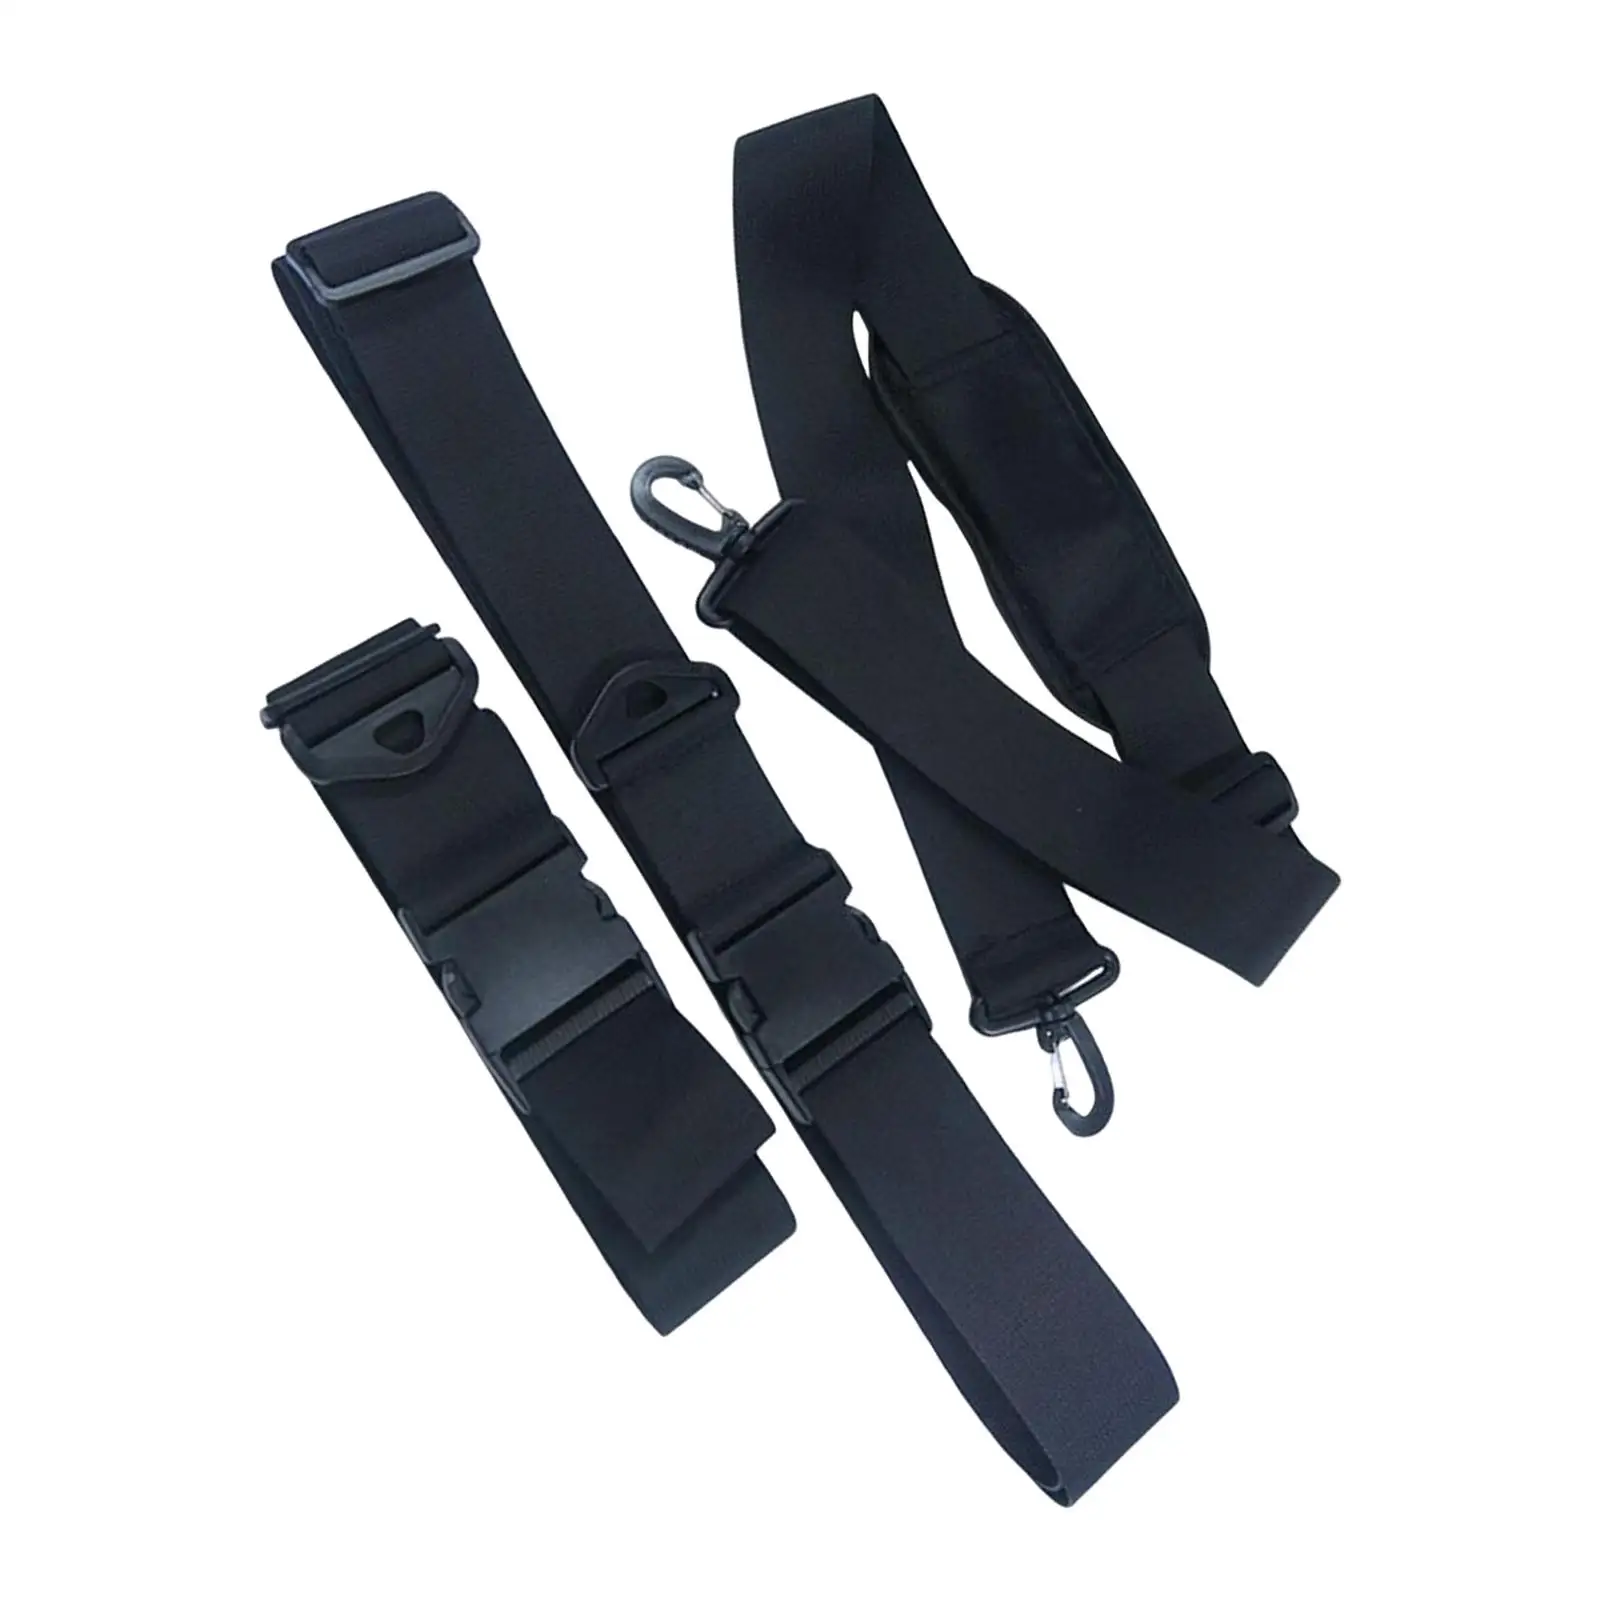 Paddle Board Shoulder Strap Carrier Universal Carrying Sling Padded Bag Belt for Inflatable Rafts Stand up Paddle Board Surfing